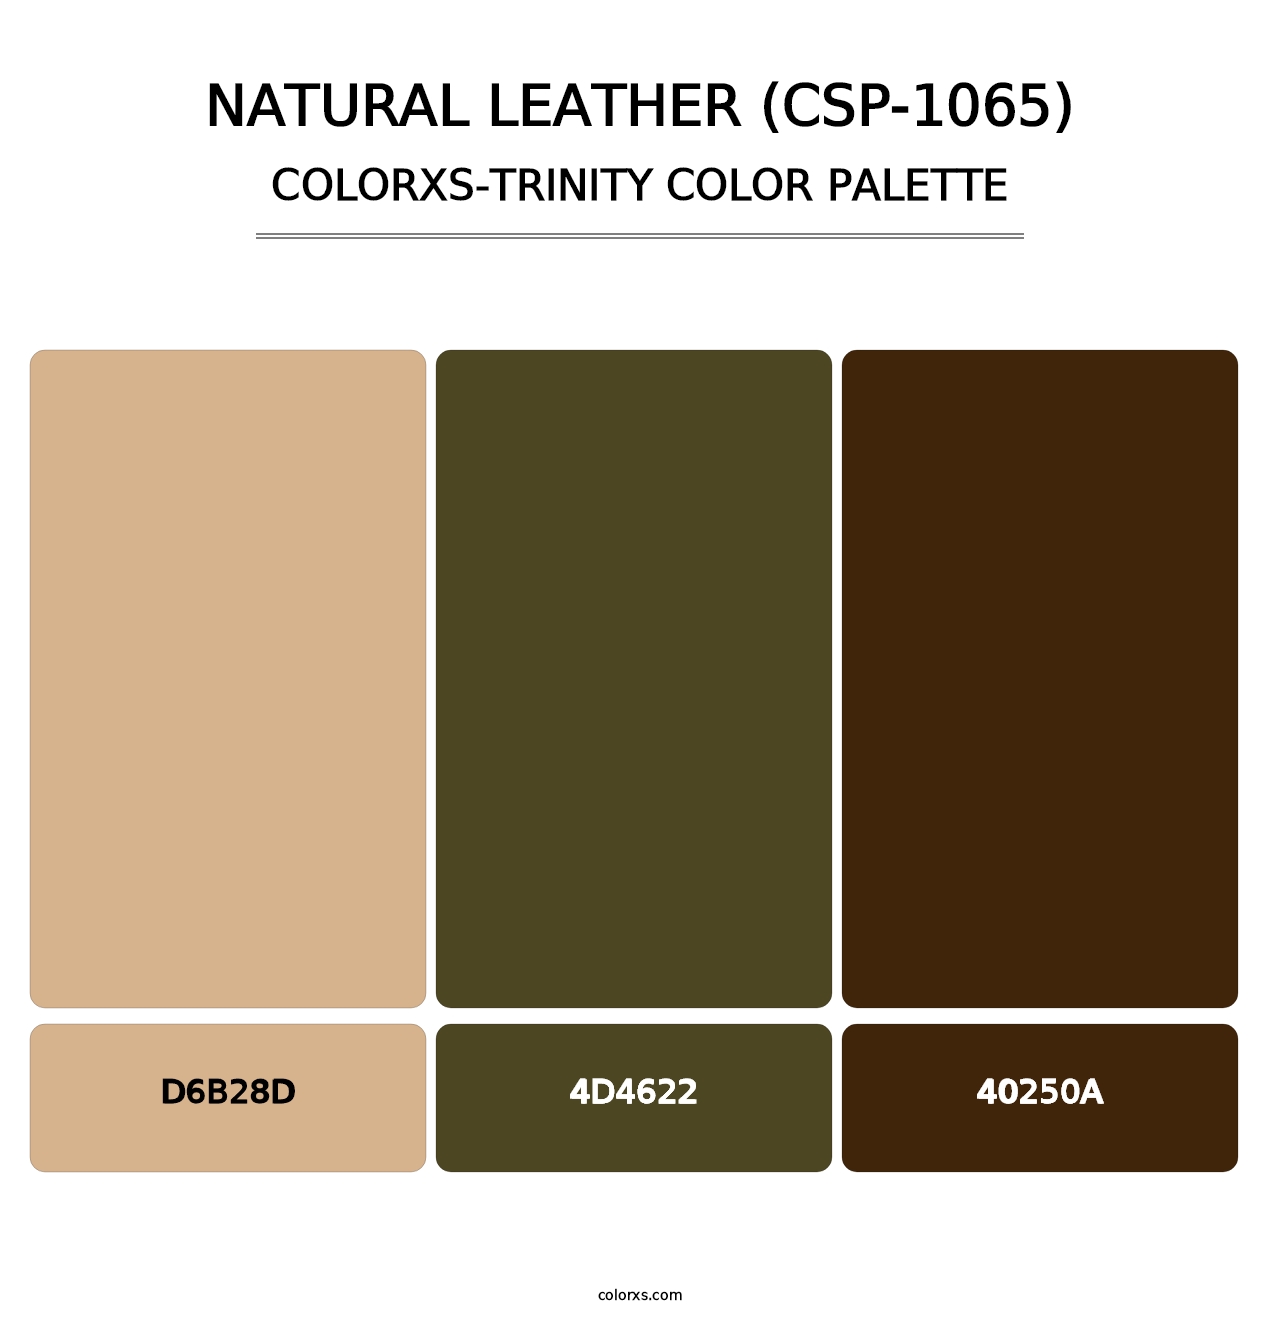 Natural Leather (CSP-1065) - Colorxs Trinity Palette